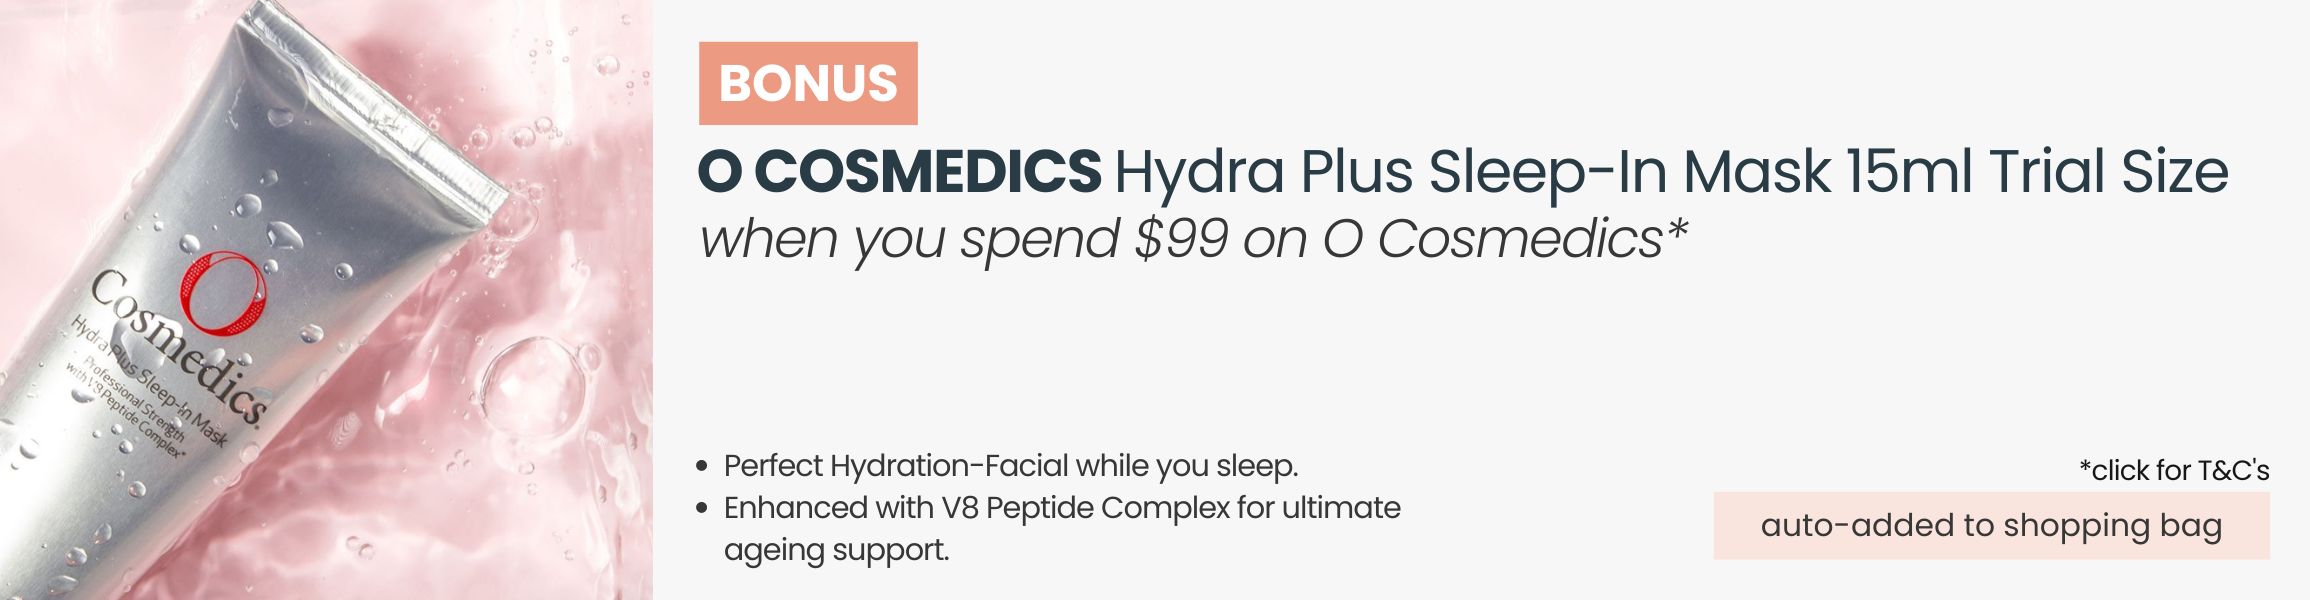 BONUS O Cosmedics Hydra Plus Sleep-In Mask  15ml Trial Size. Automatically added to your shopping bag when you spend $99 on O Cosmedics products.